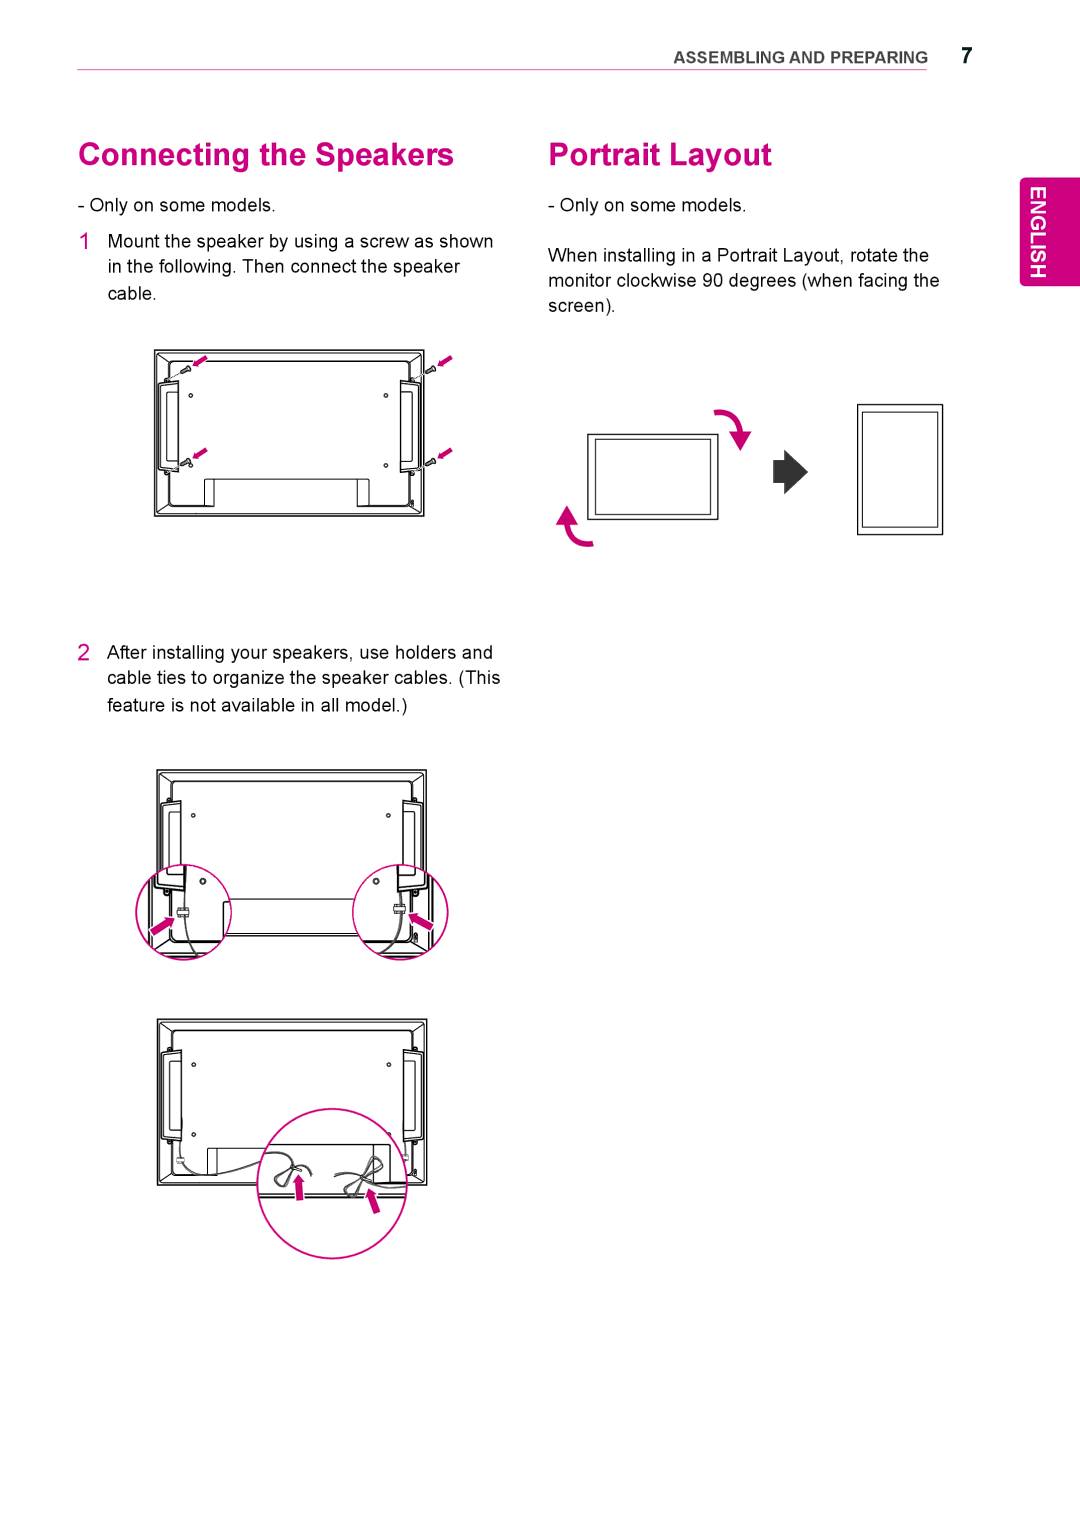 LG Electronics 65VS10 owner manual Connecting the Speakers, Portrait Layout 